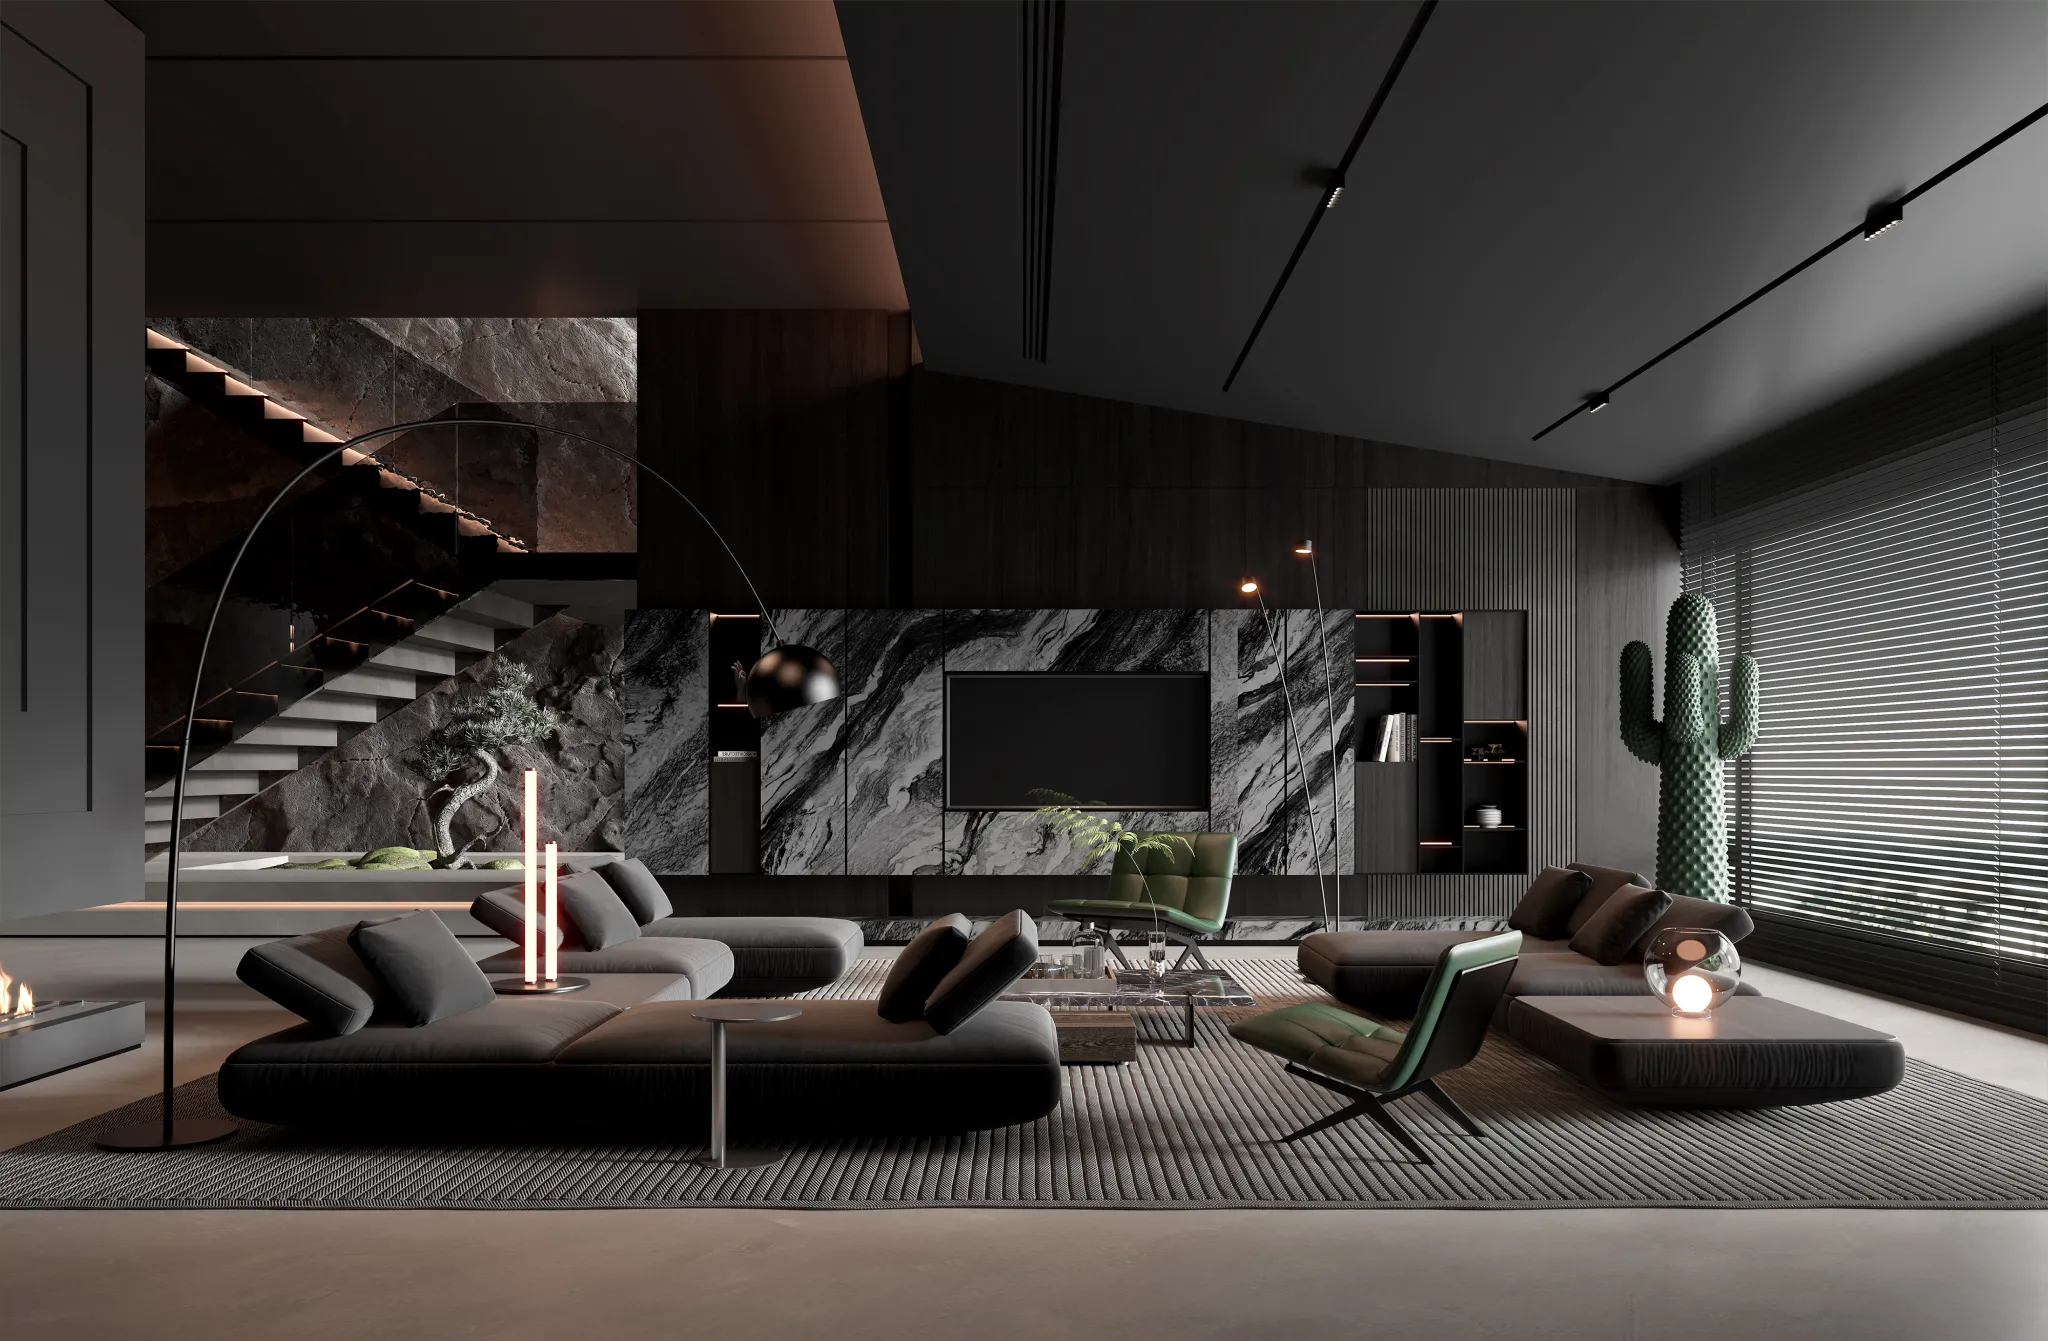 HOUSE SPACE 3D SCENES – LIVING ROOM – 0180